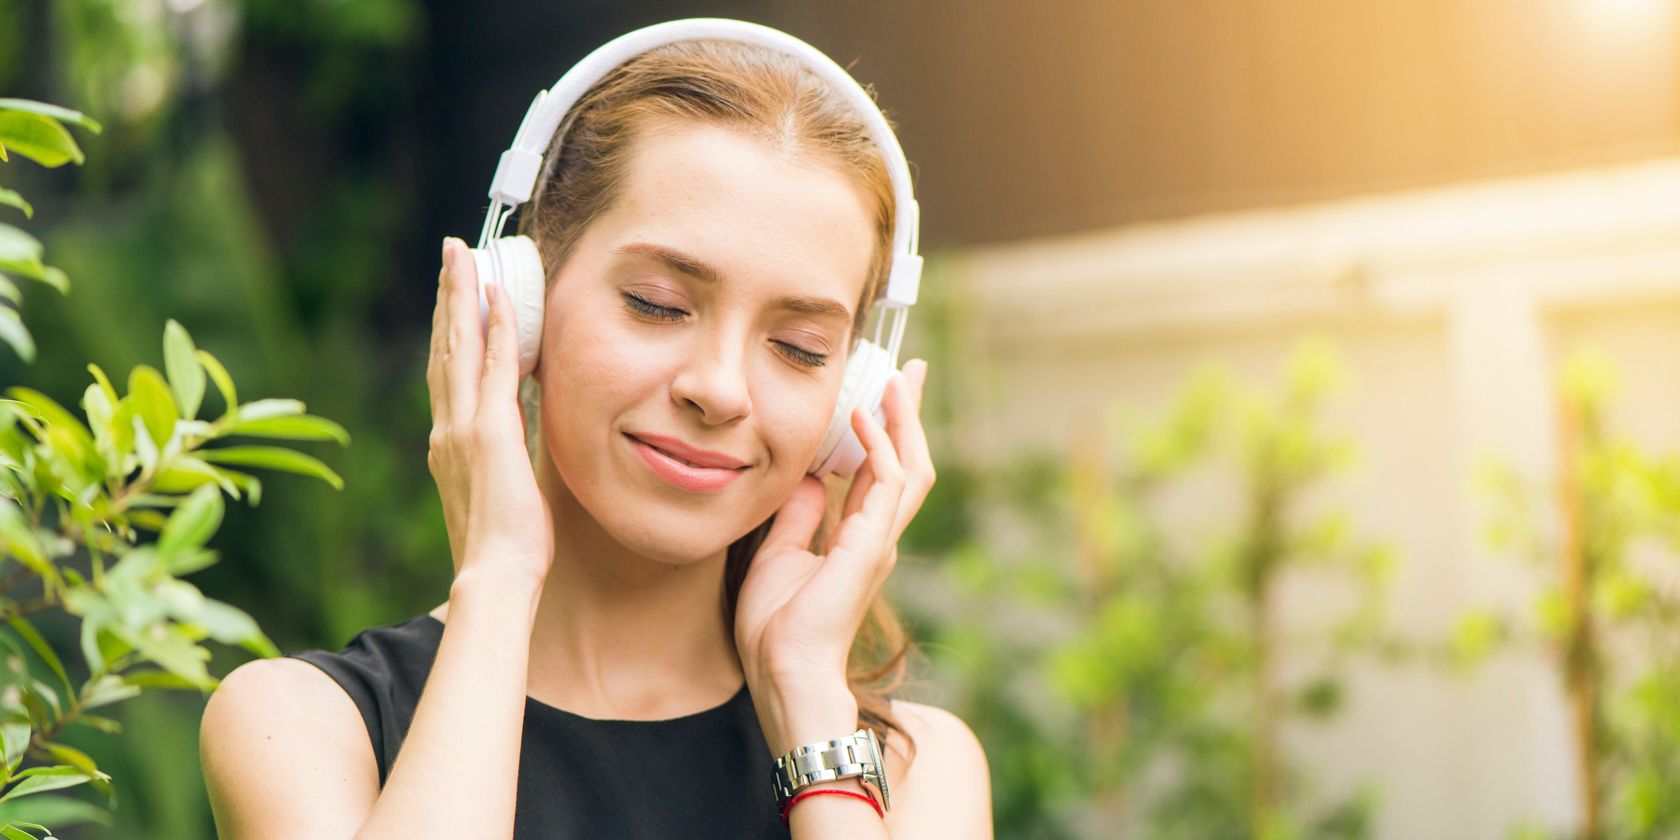 Woman in a black vest listening to headphones and smiling